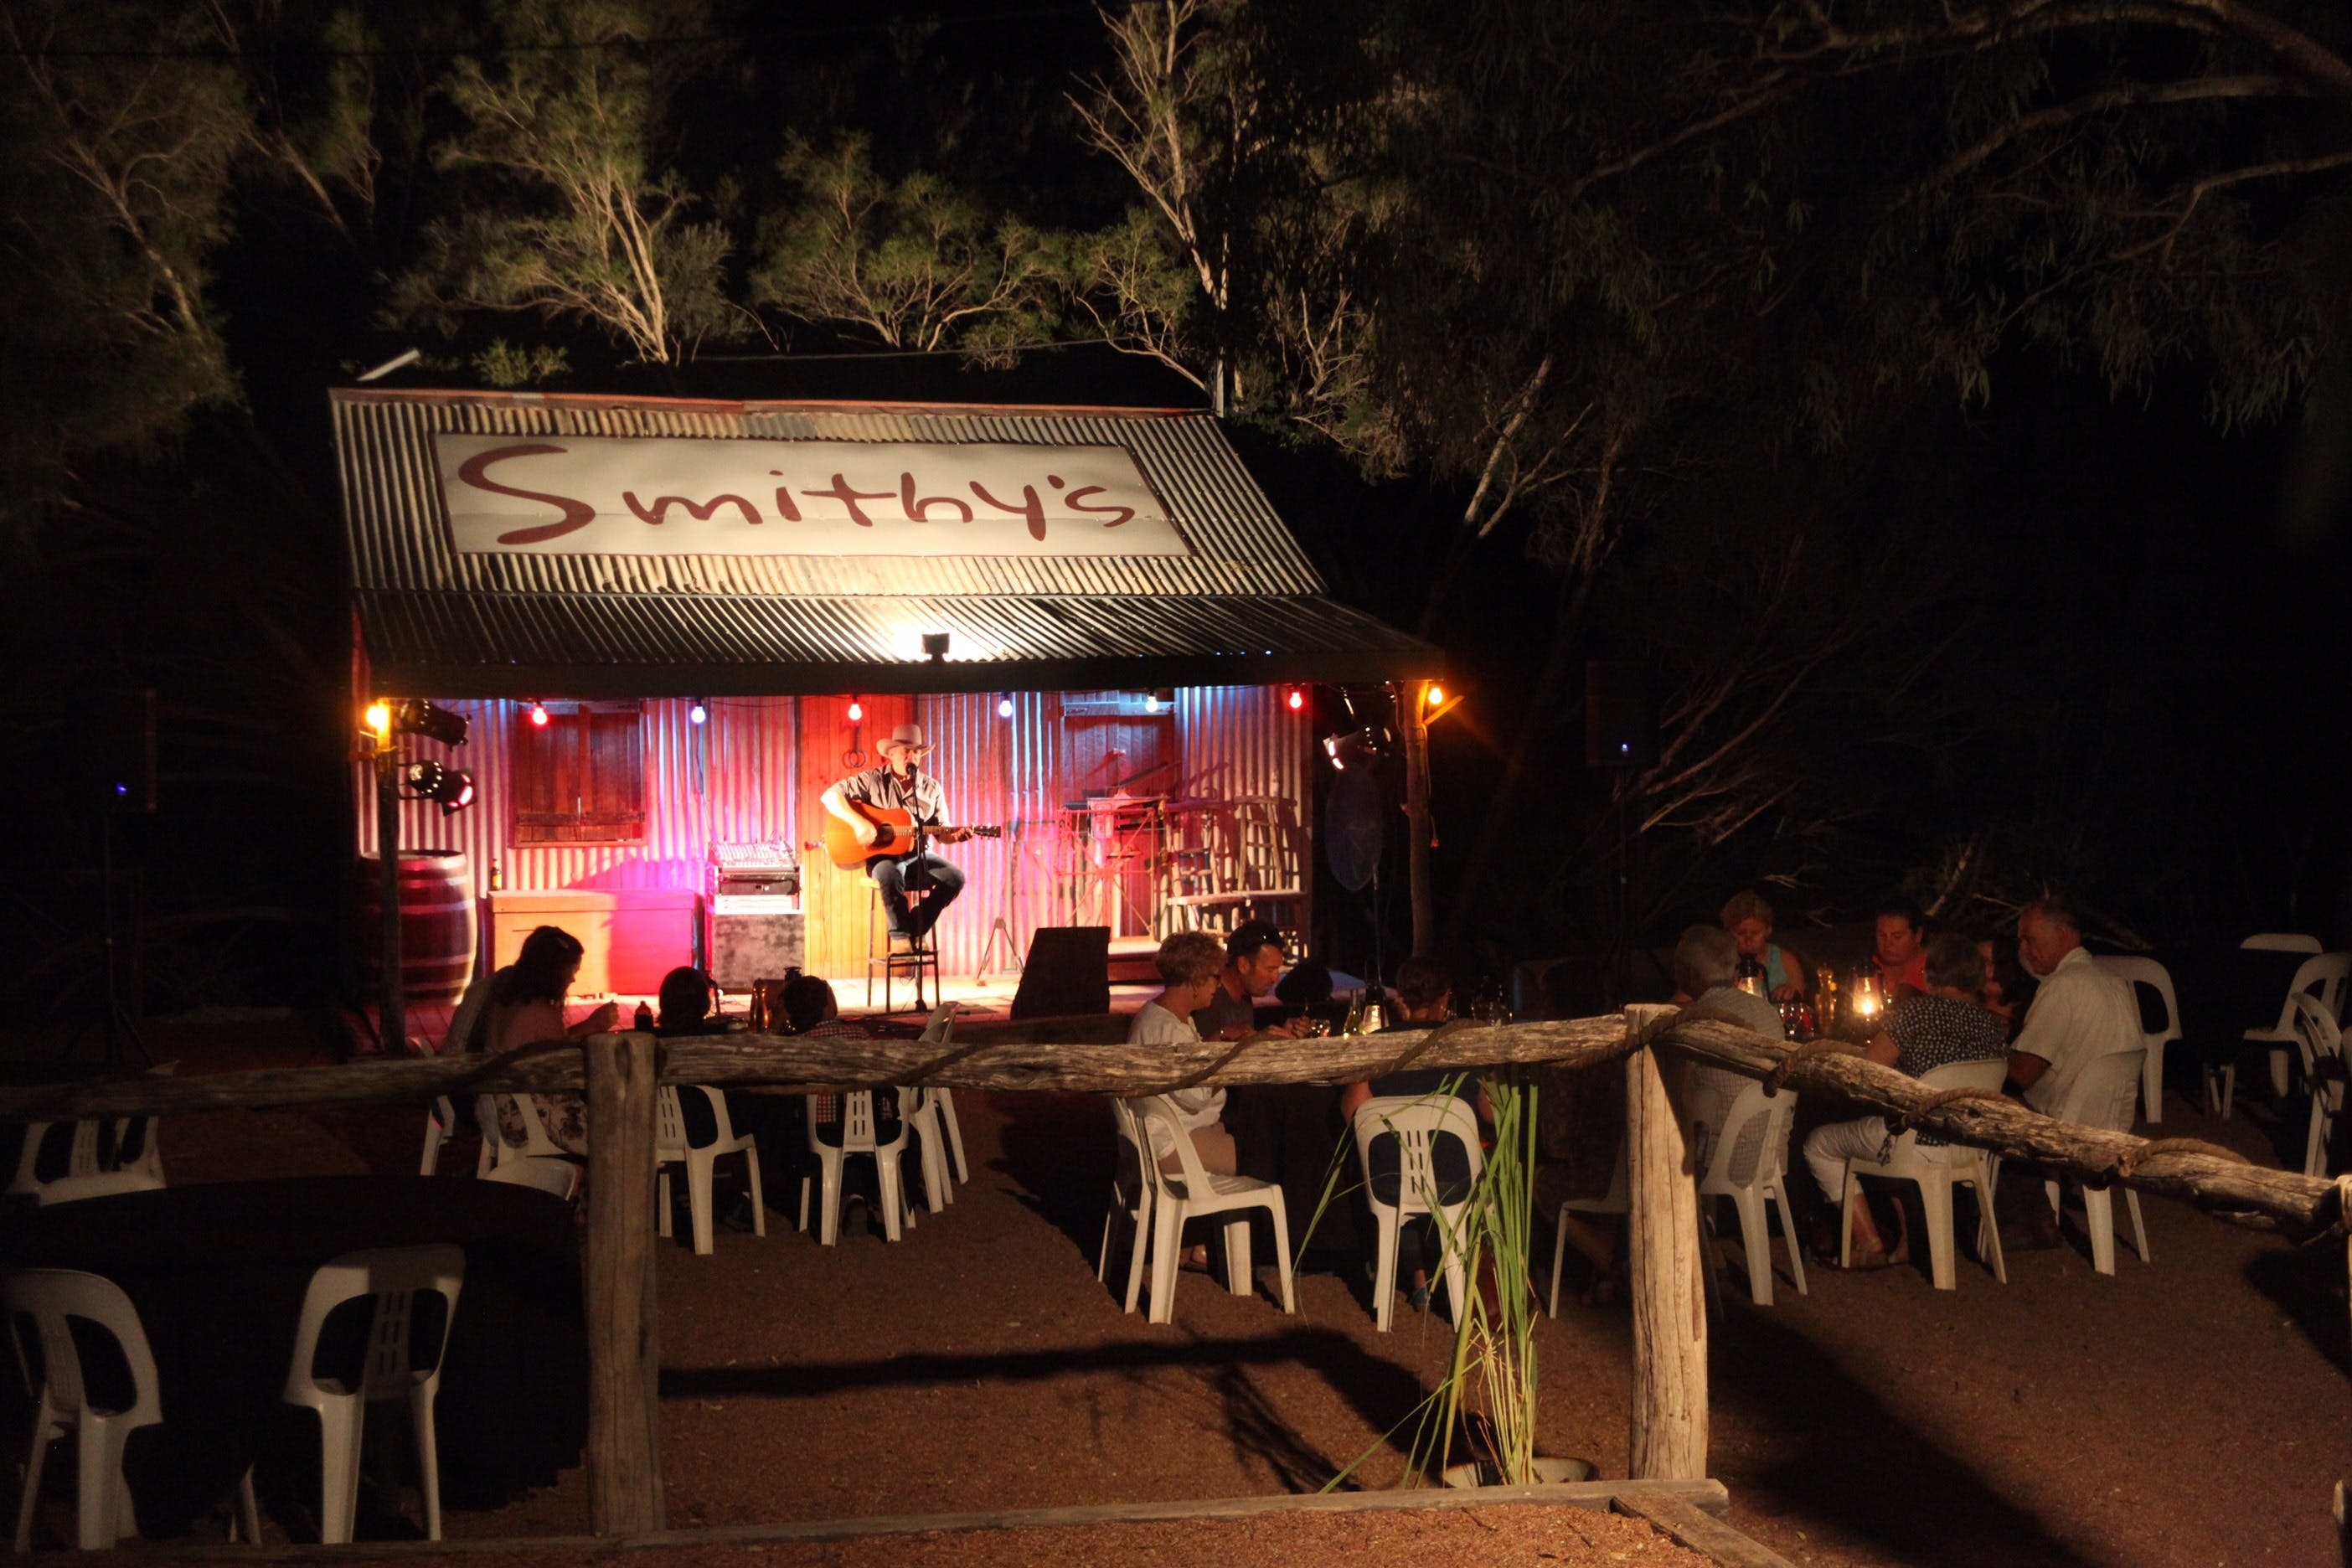 Smithy's Outback Dinner and Show - St Kilda Accommodation